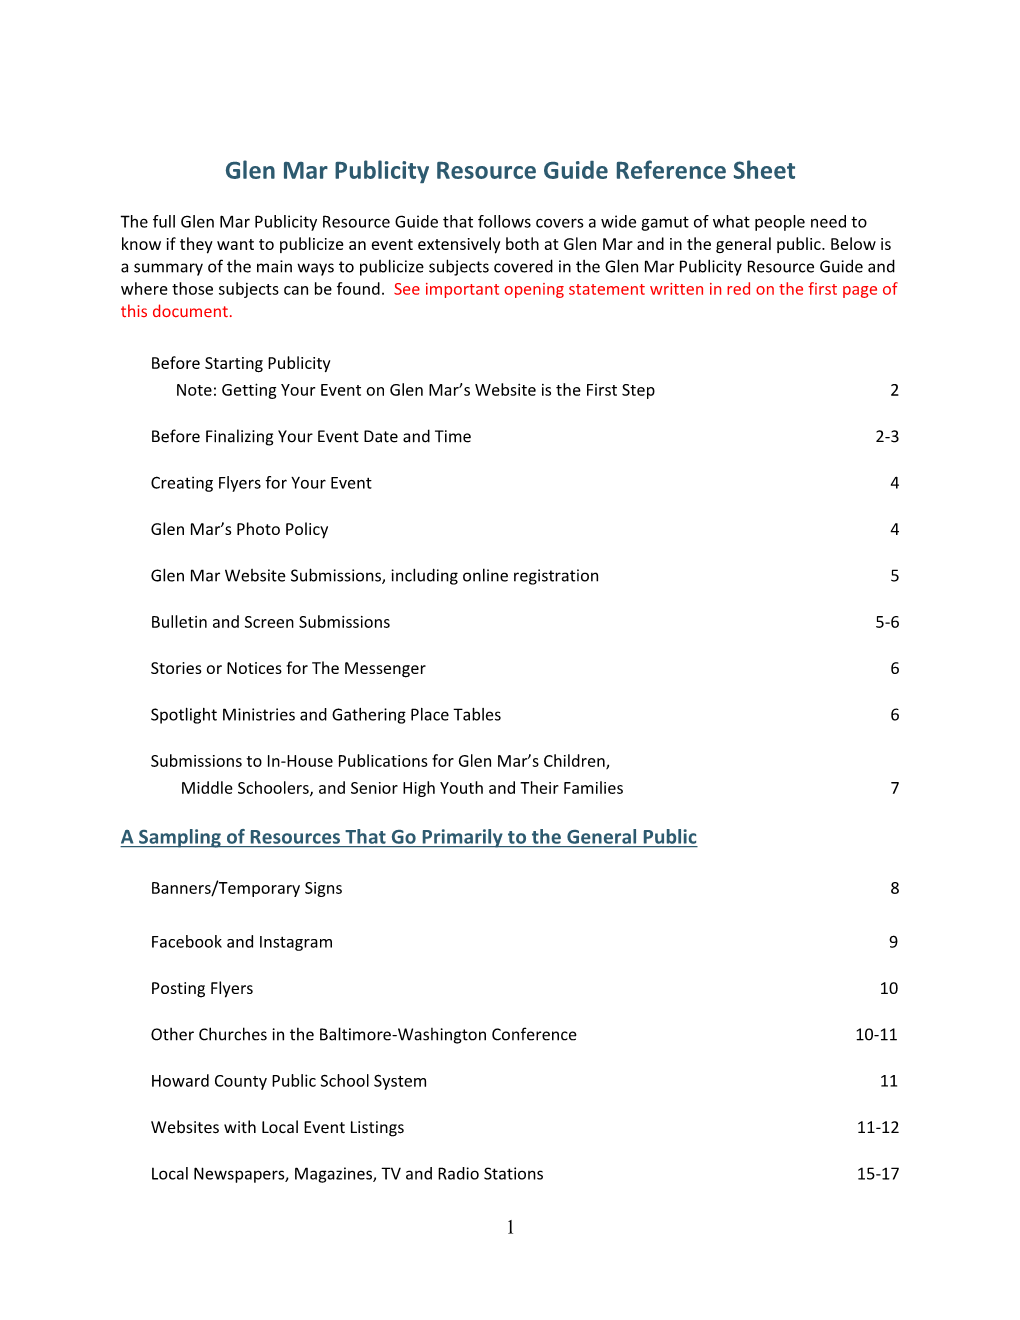 Glen Mar Publicity Resource Guide Reference Sheet